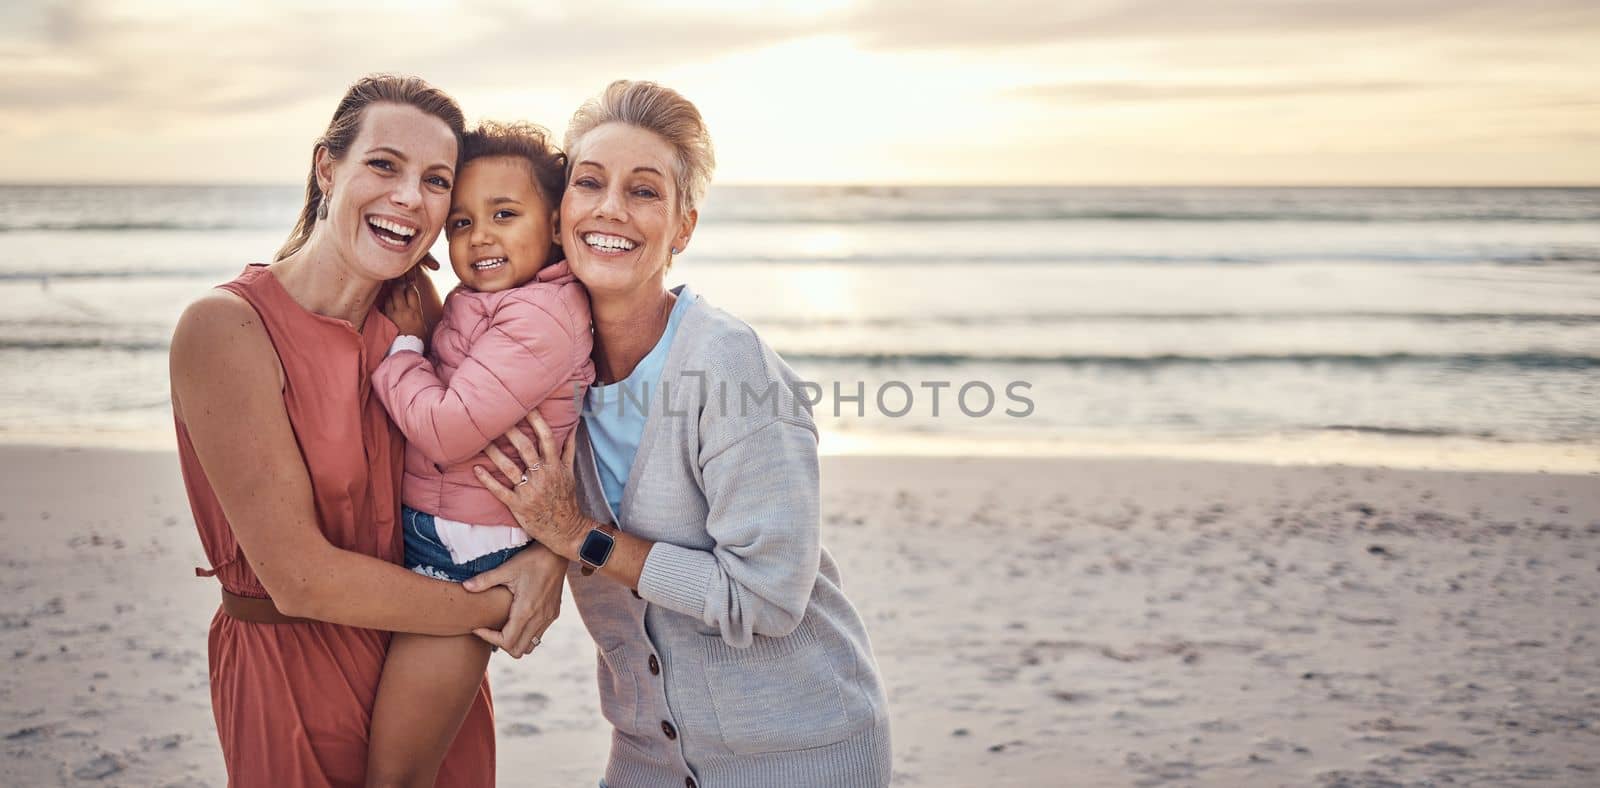 Lesbian, couple and portrait of family on beach together for travel vacation, happy and relax bonding by sea side. Happy homosexual parents, child smile and ocean sunset or relaxing in summer.